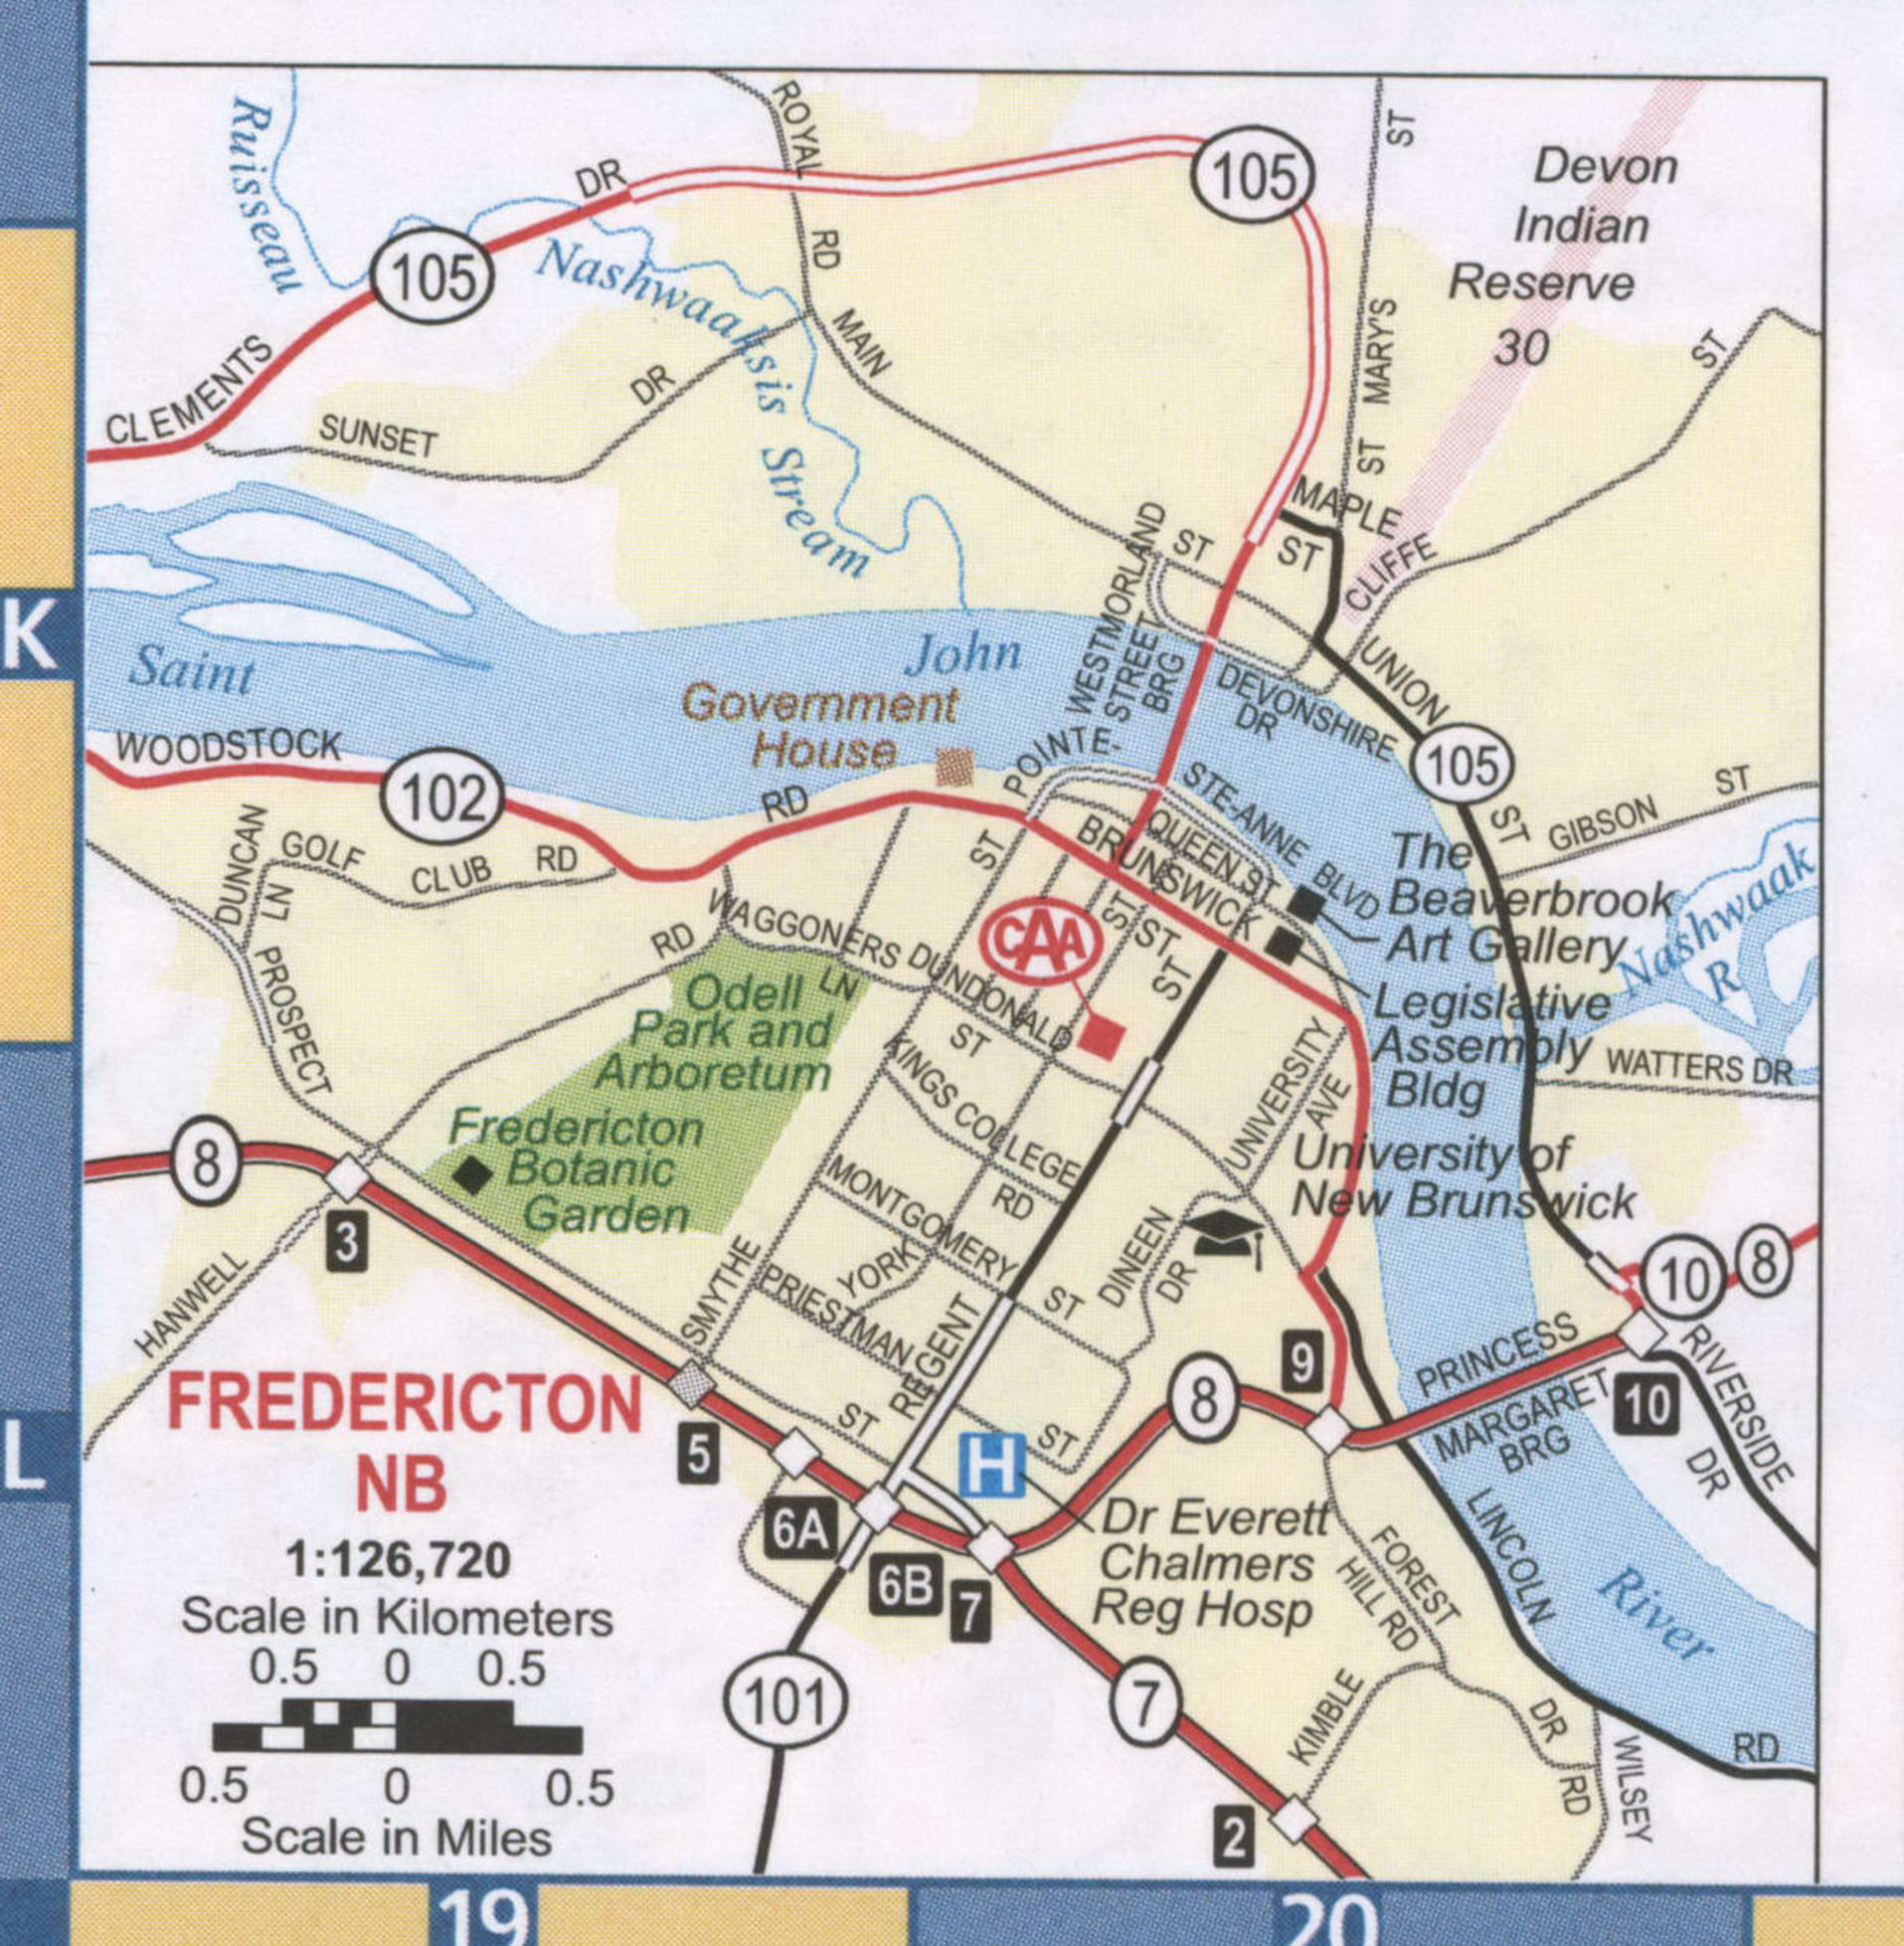 Fredericton NB road map